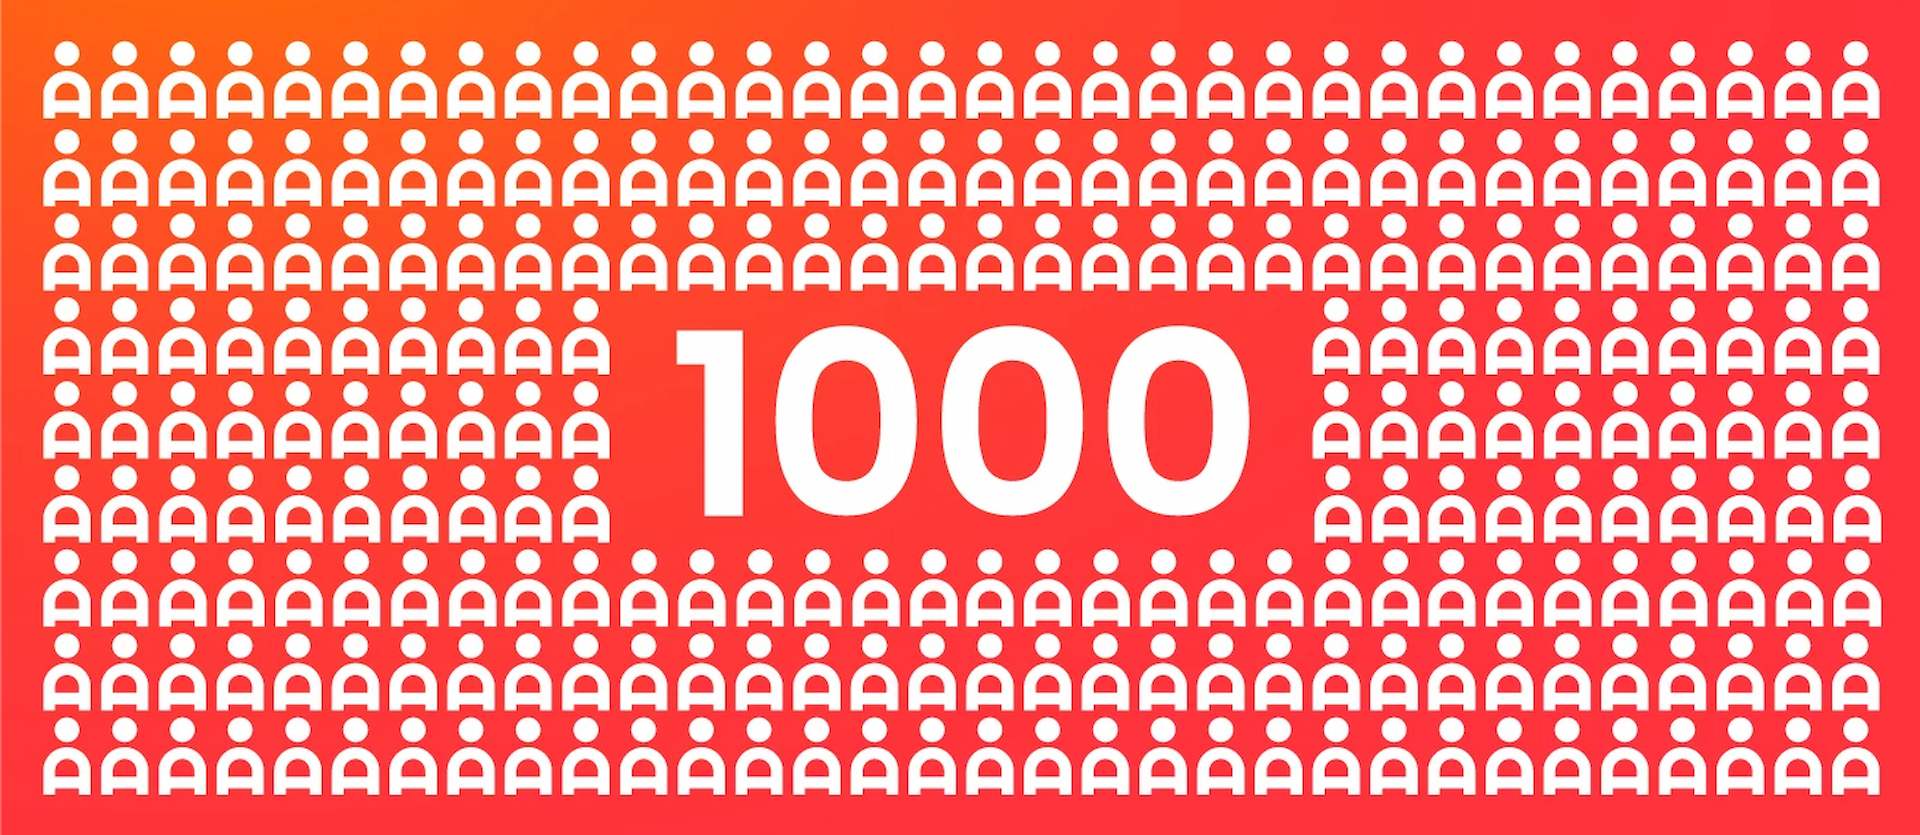 AND Digitals rapid growth continues with 1000 staff milestone (1)